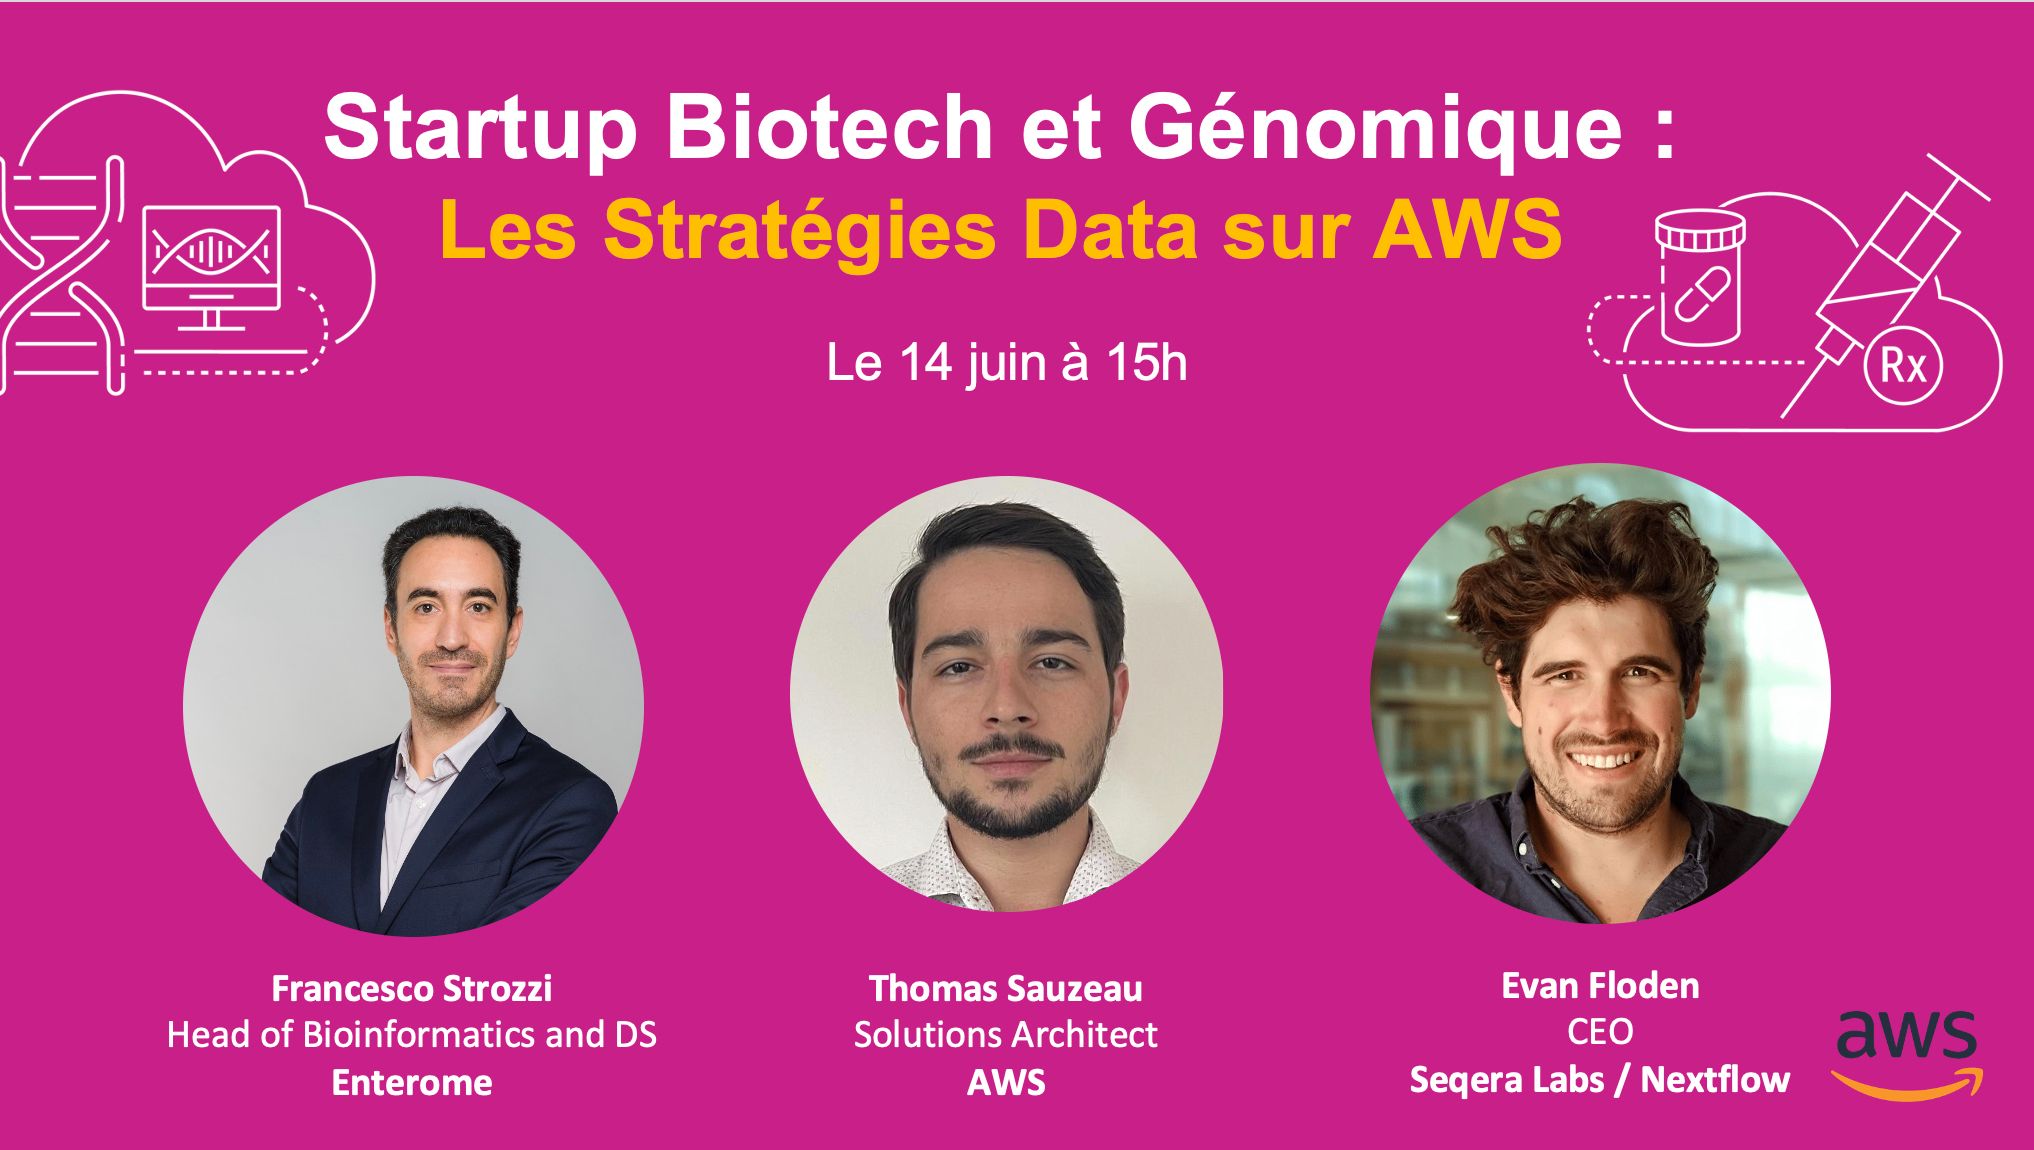 Genomics and Biotech Startups: accelerate your discoveries by unlocking the potential of your data on AWS